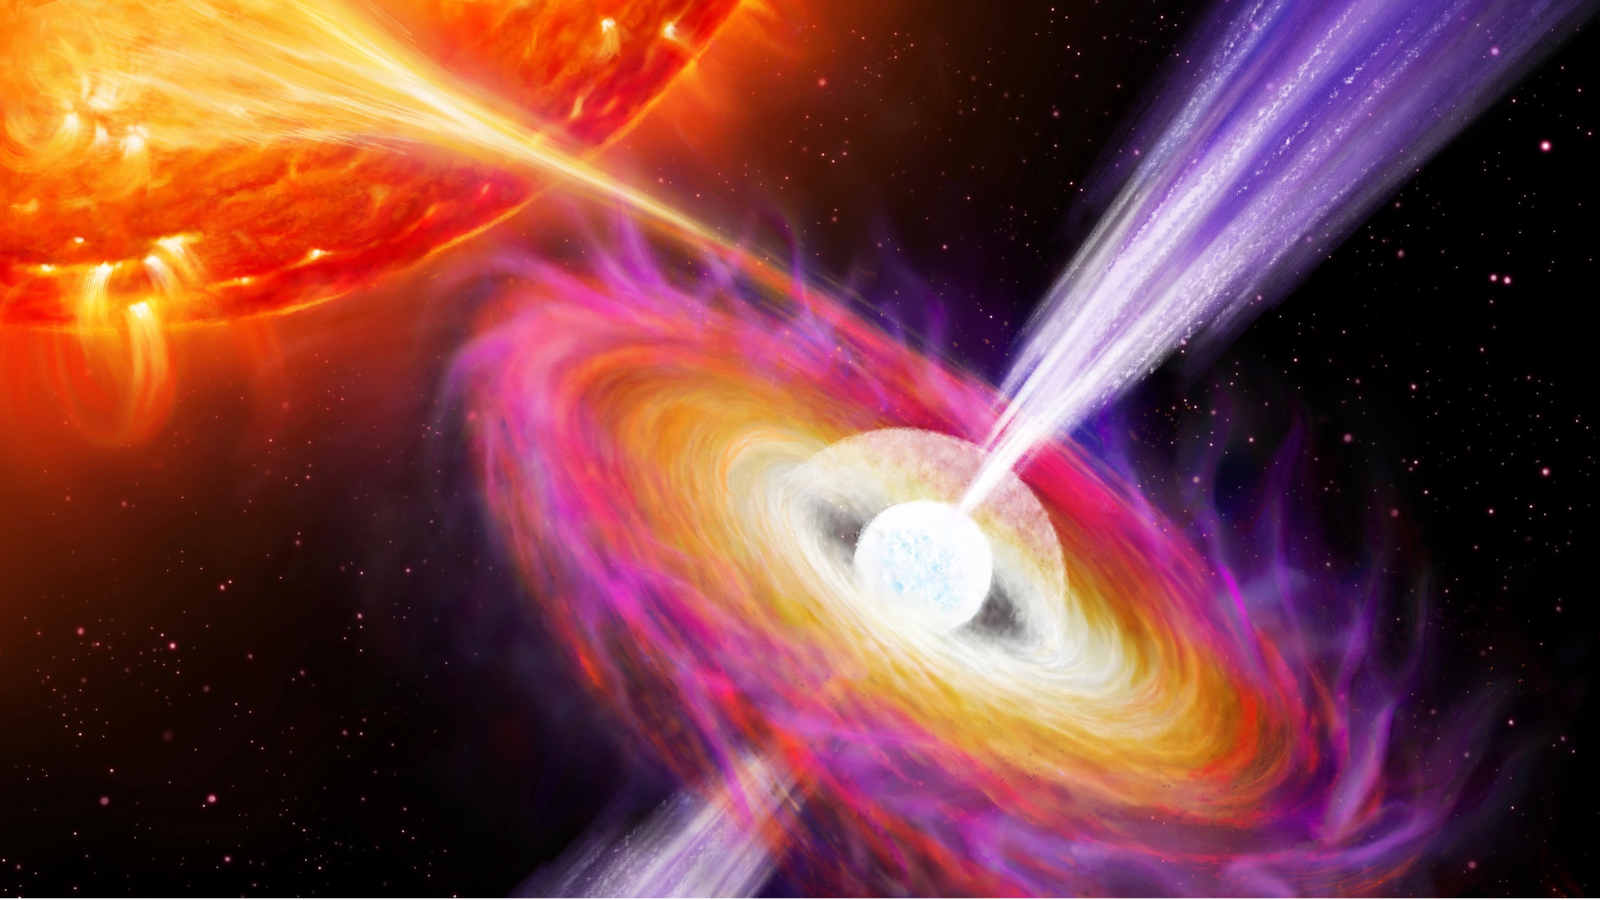 ‘Vampire’ neutron star blasts are related to jets traveling at near-light speeds